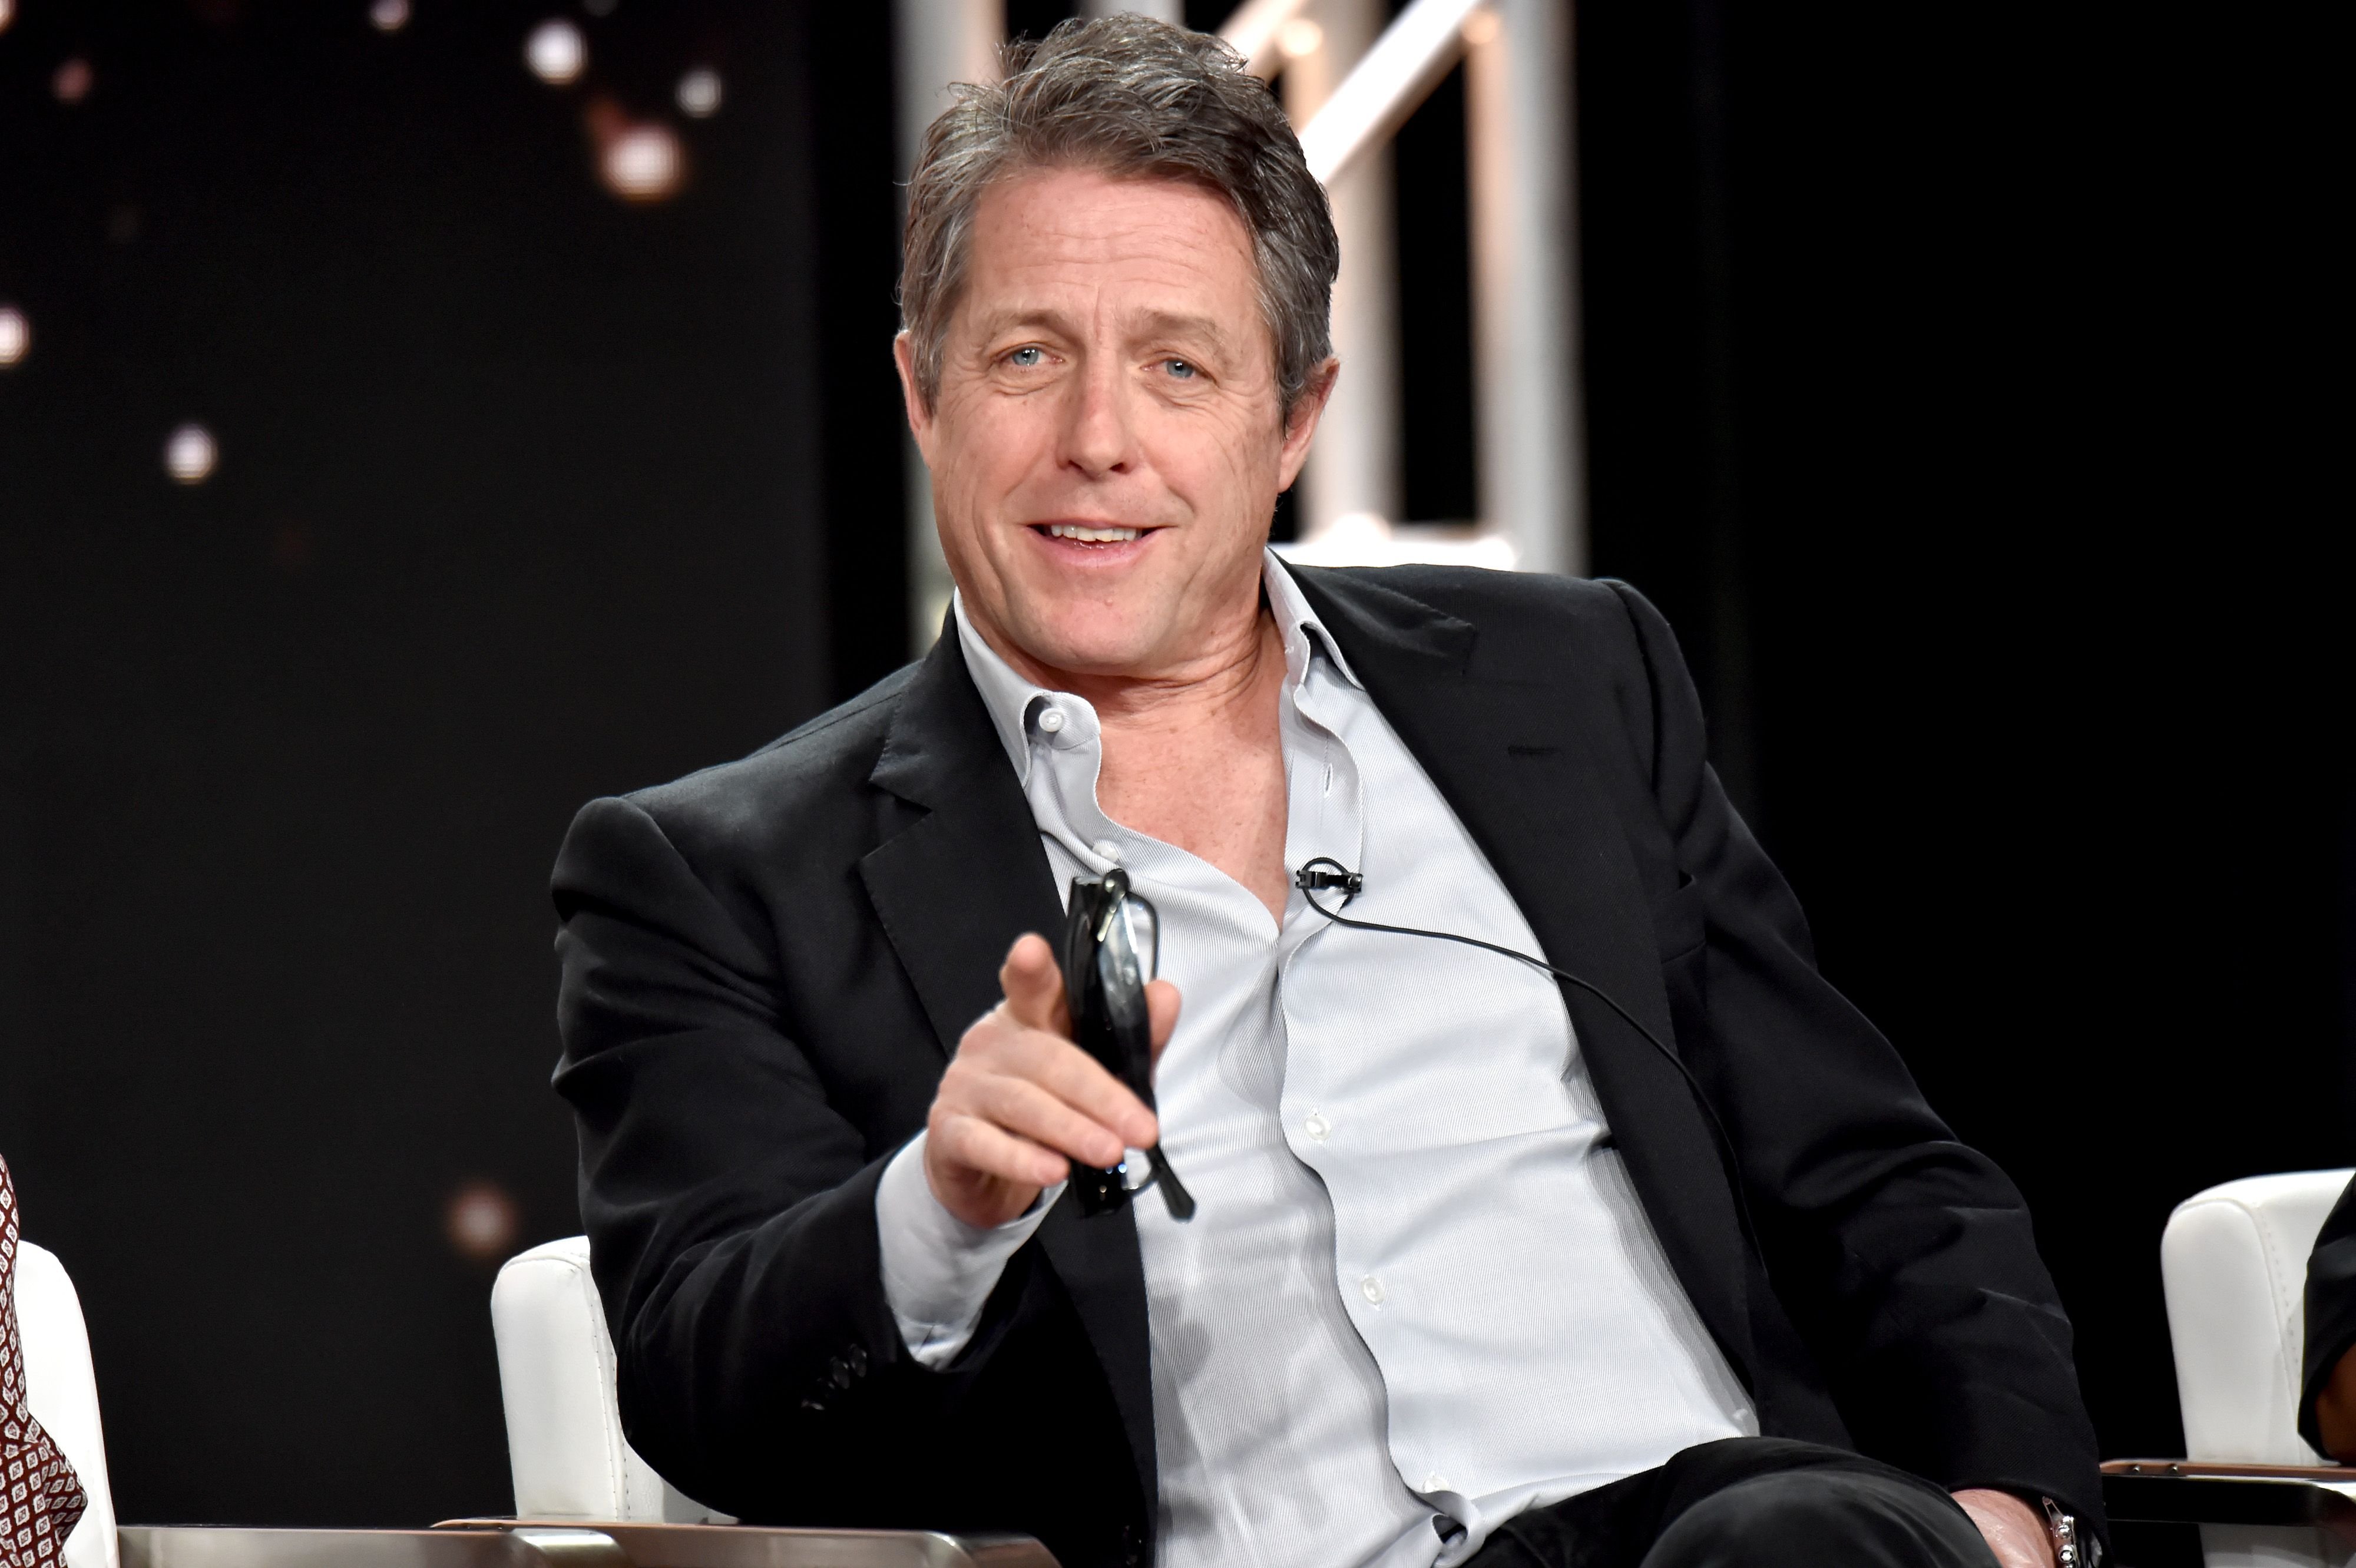 Hugh Grant of 'The Undoing' appears onstage at the HBO segment of the 2020 Winter Television Critics Association Press Tour at The Langham Huntington, Pasadena on January 15, 2020 | Photo: Getty Images